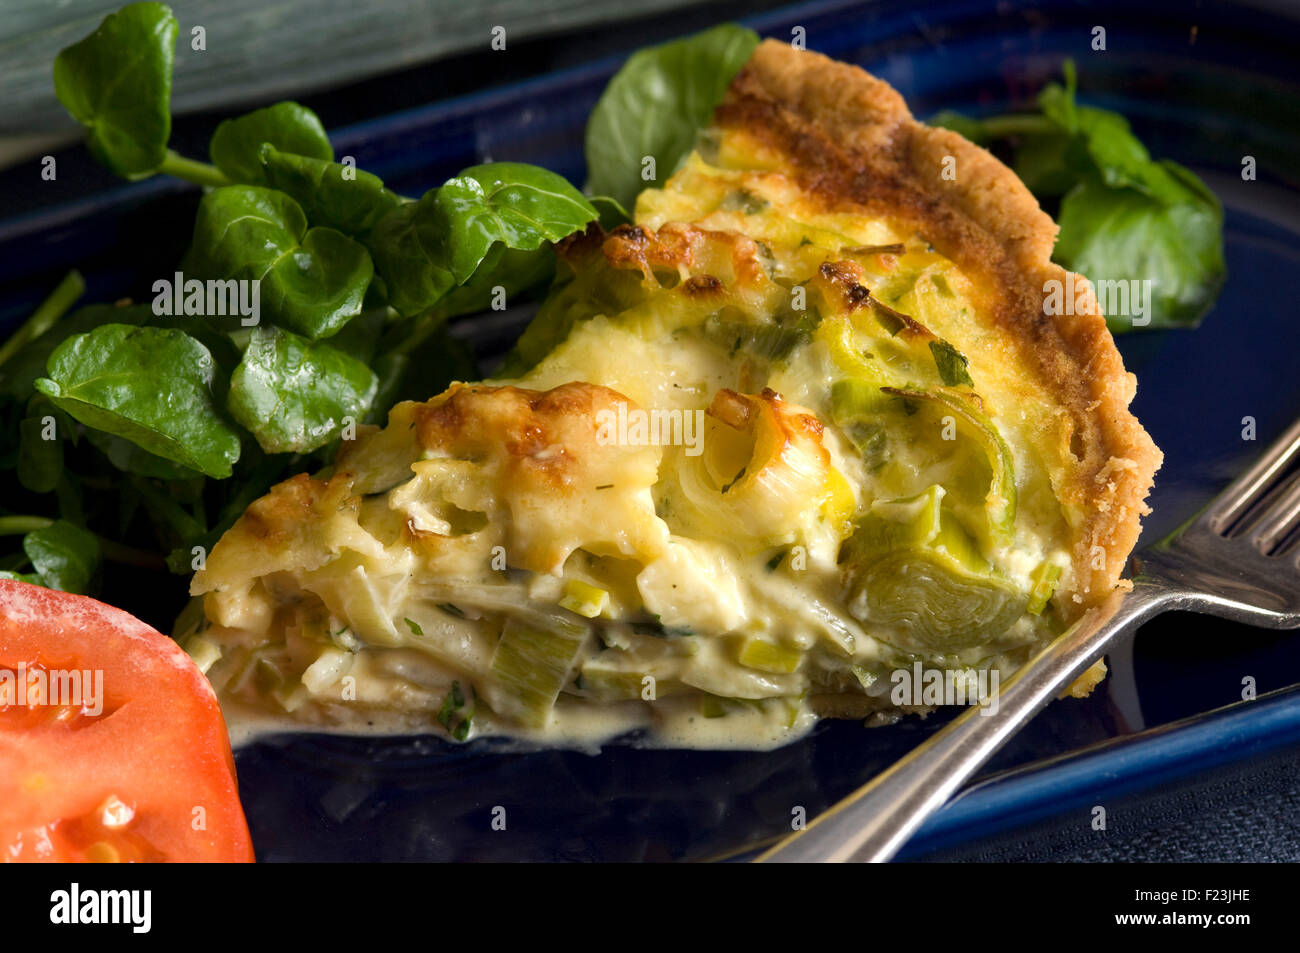 Vegetable quiche. a UK food meal cook cooking cuisine veg vegetables Stock Photo